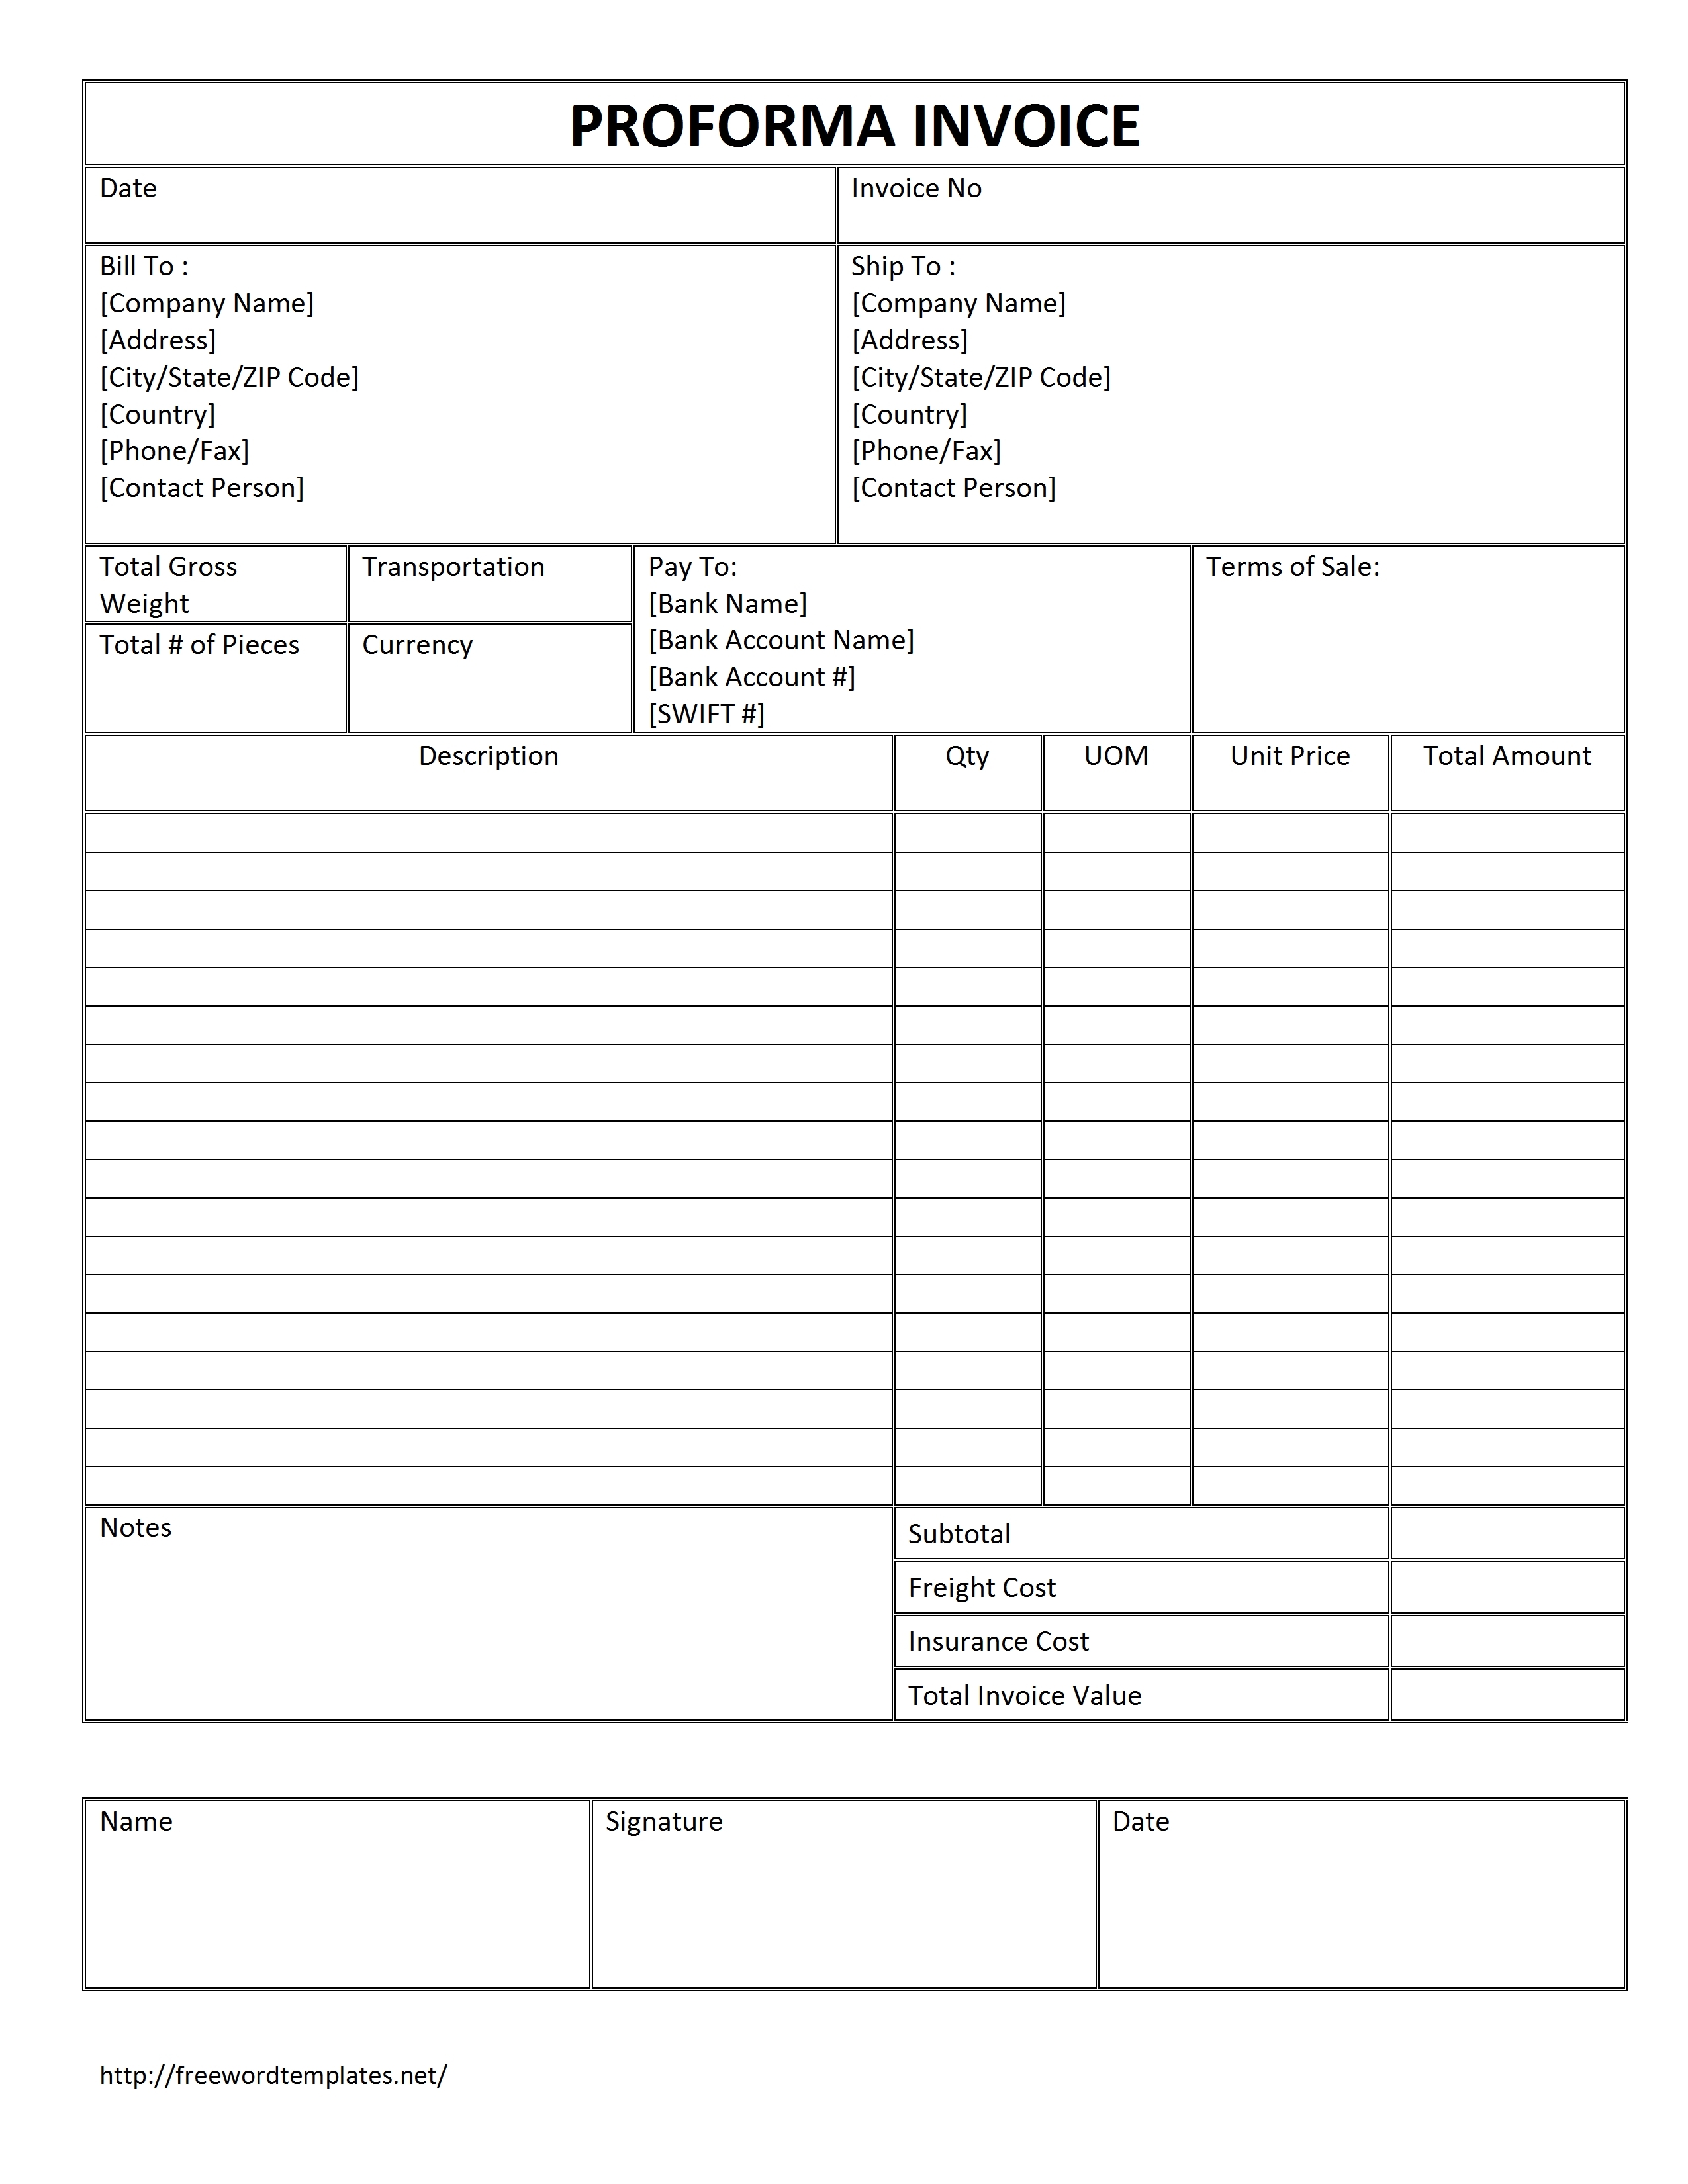 proforma invoice template best business template microsoft word free invoice template